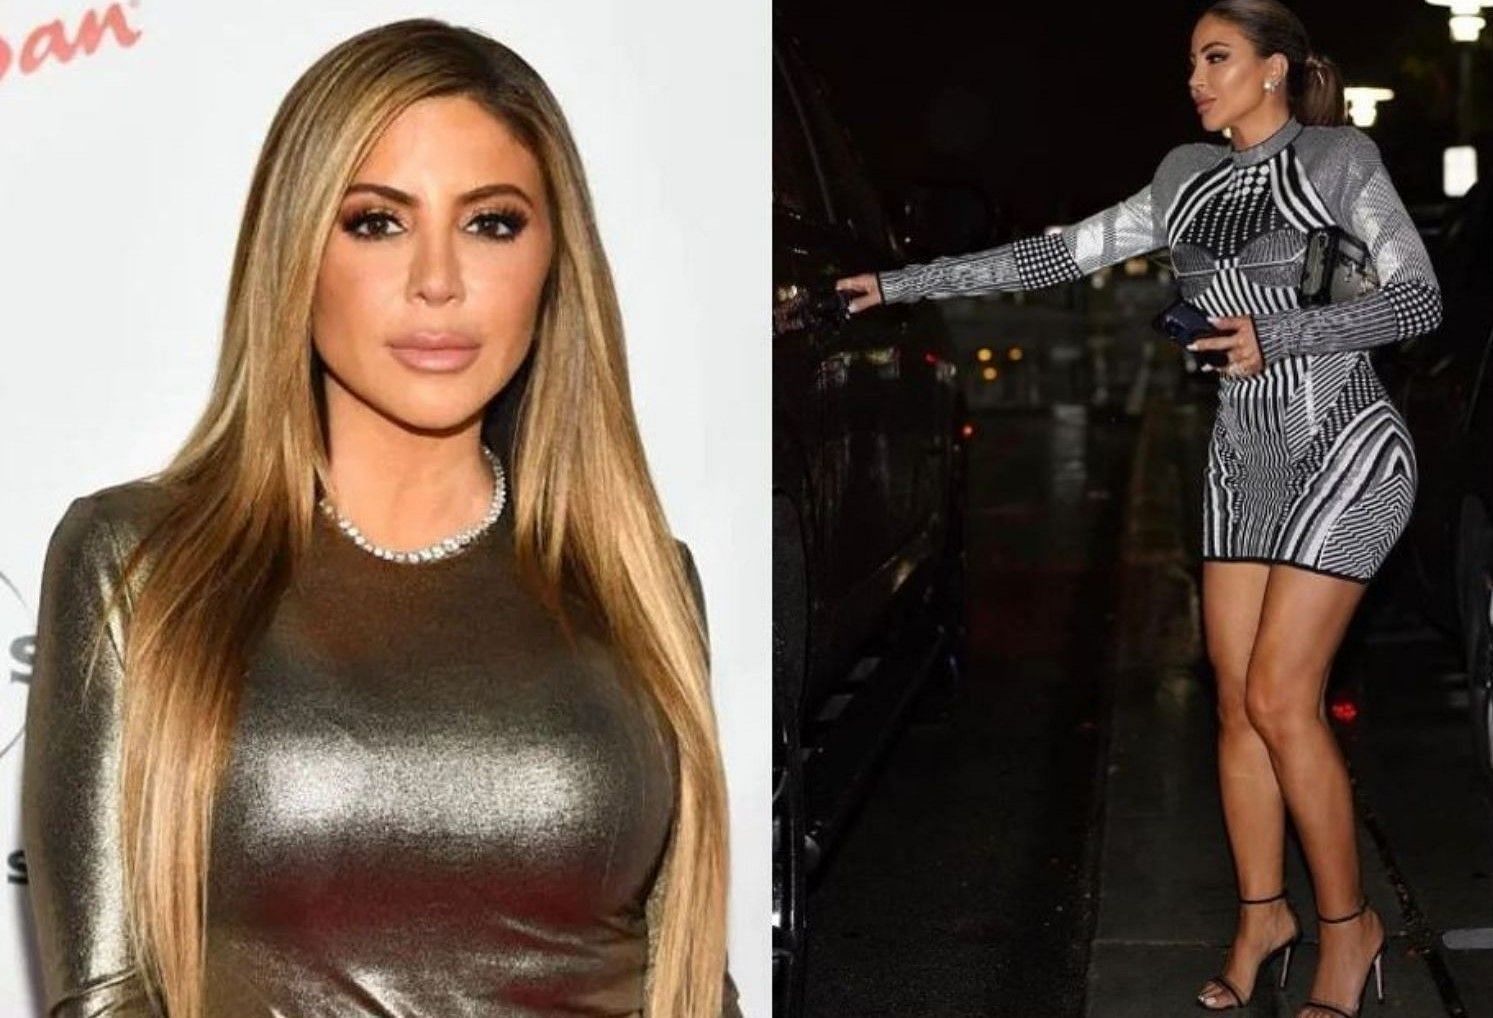 Larsa Pippen showcased her keen sense of style (R) after recently being spotted rocking a Balmain minidress and a Louis Vuitton bag.